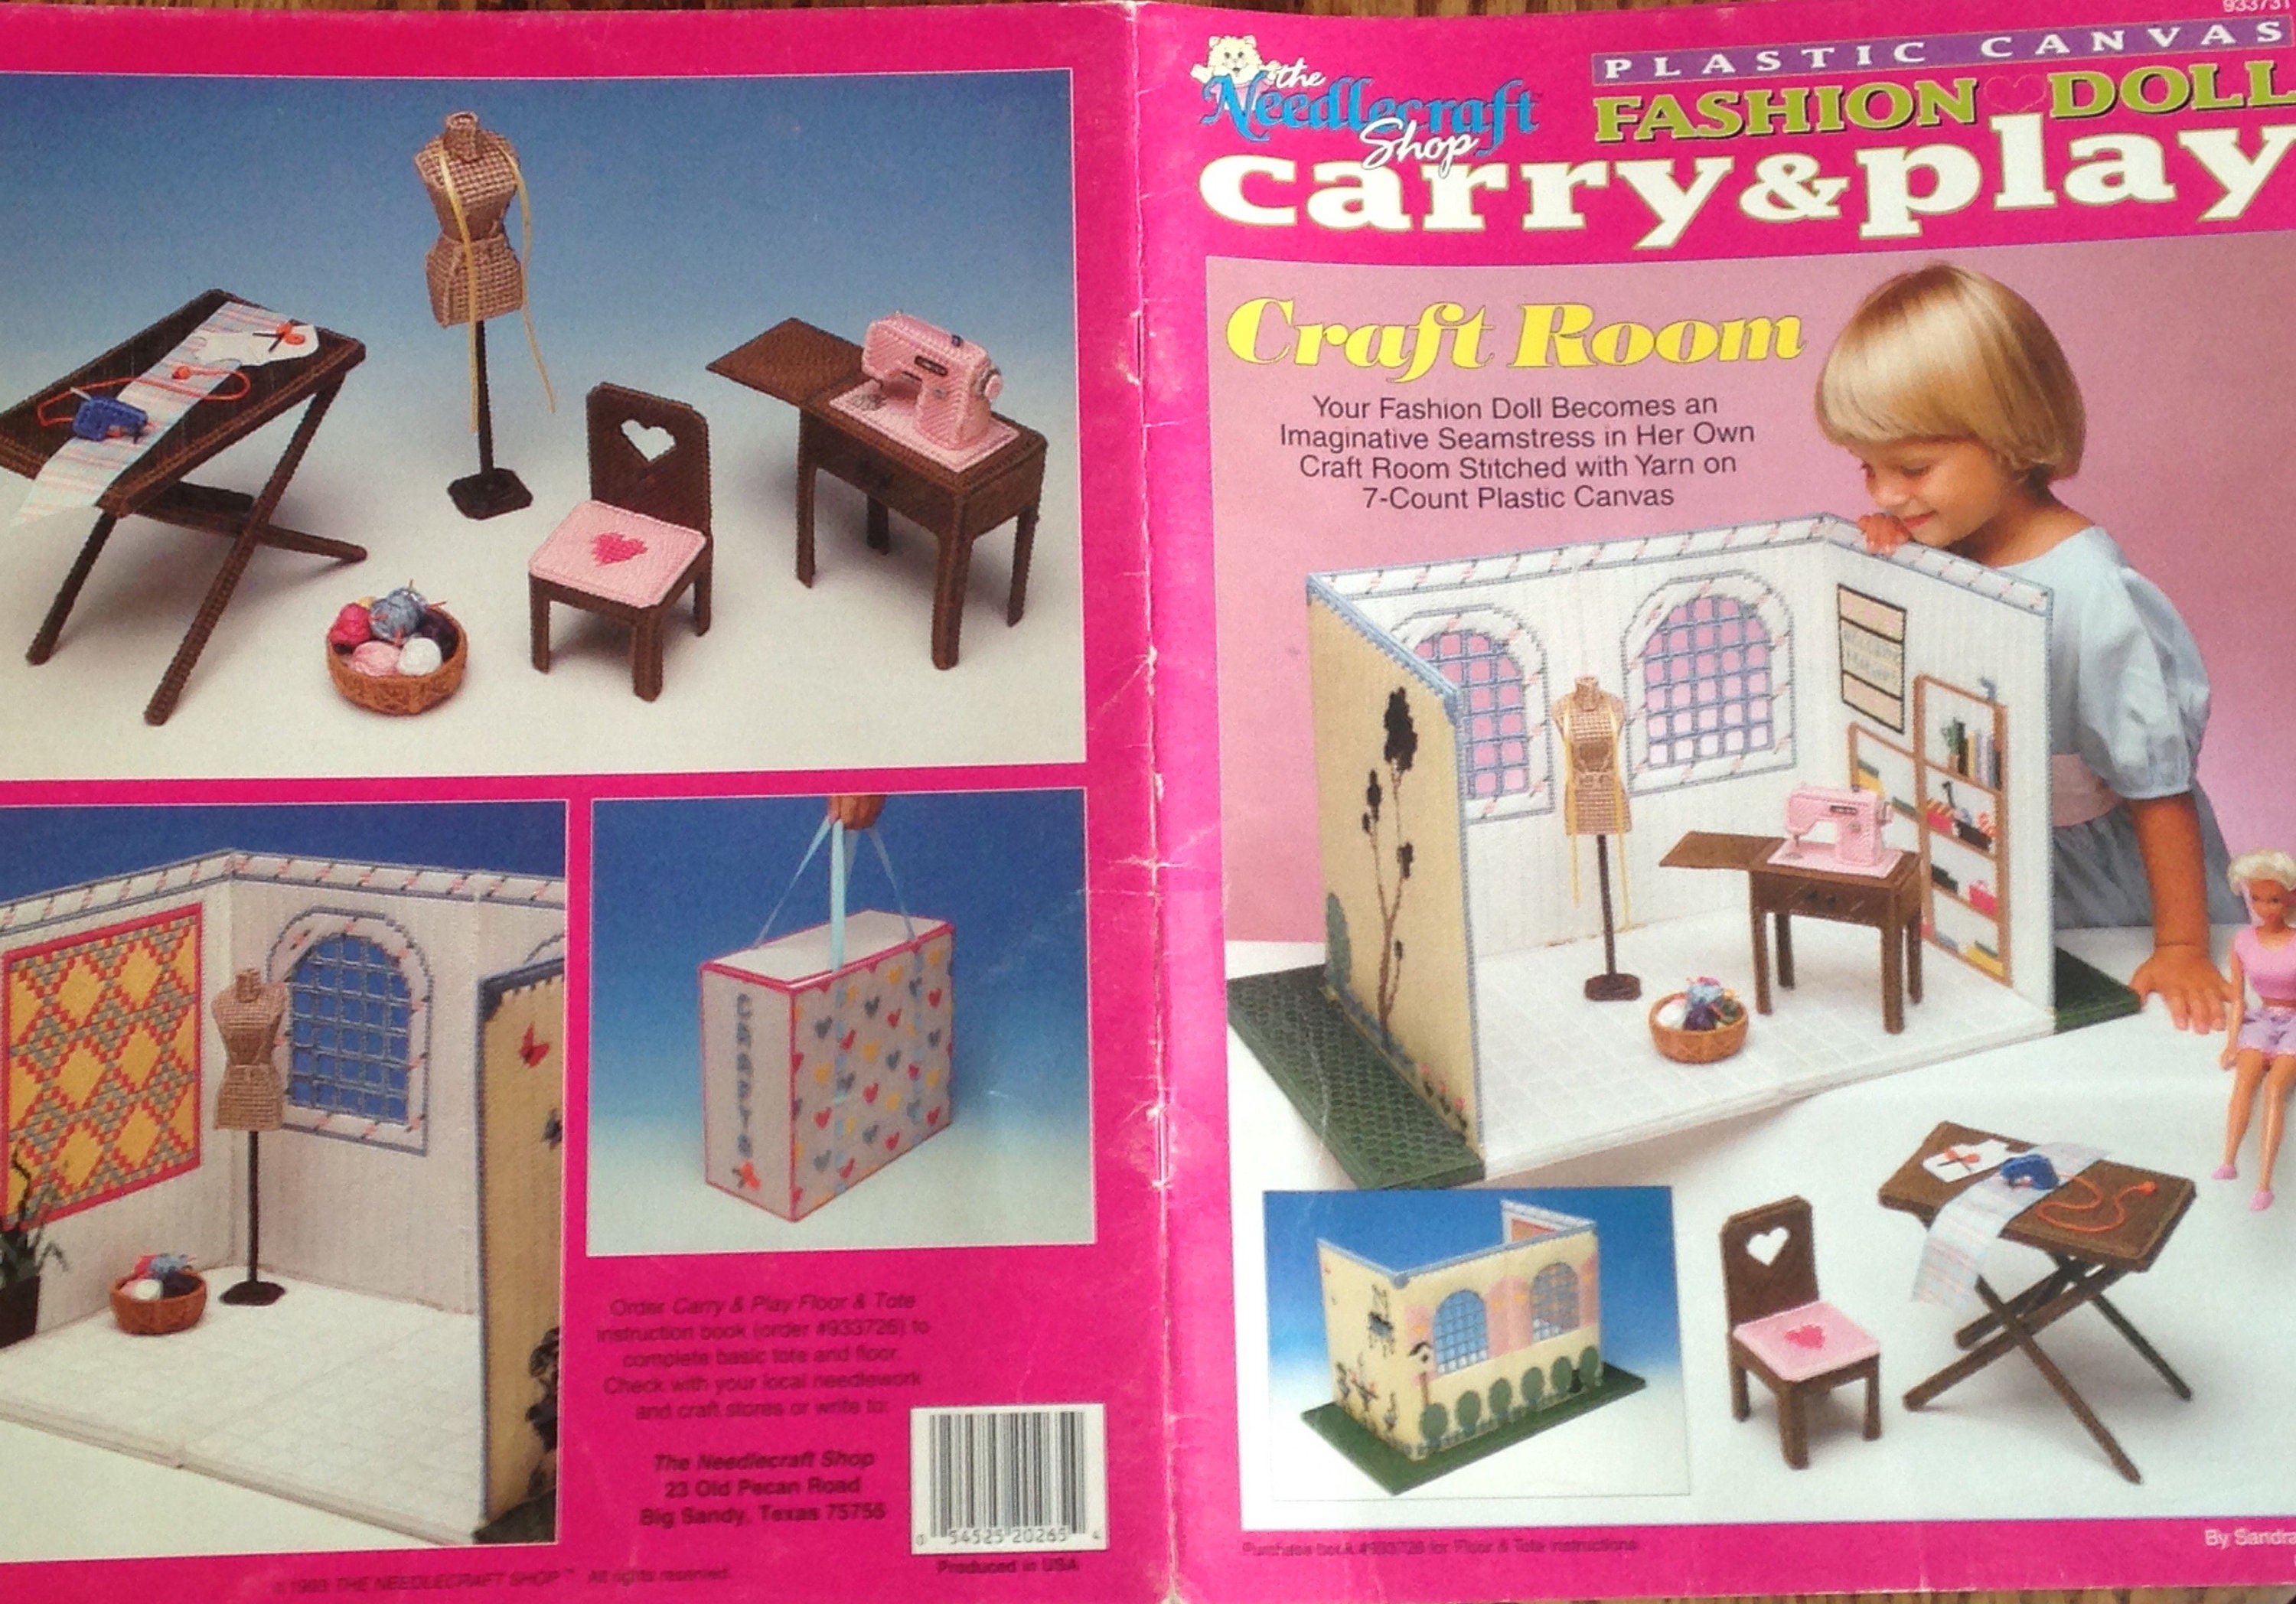 Out of Print 90s Original~Plastic Canvas Patterns~Fashion Doll Carry & Play~Dining Room~Barbie Dollhouse~Booklet 943746~Free Shipping